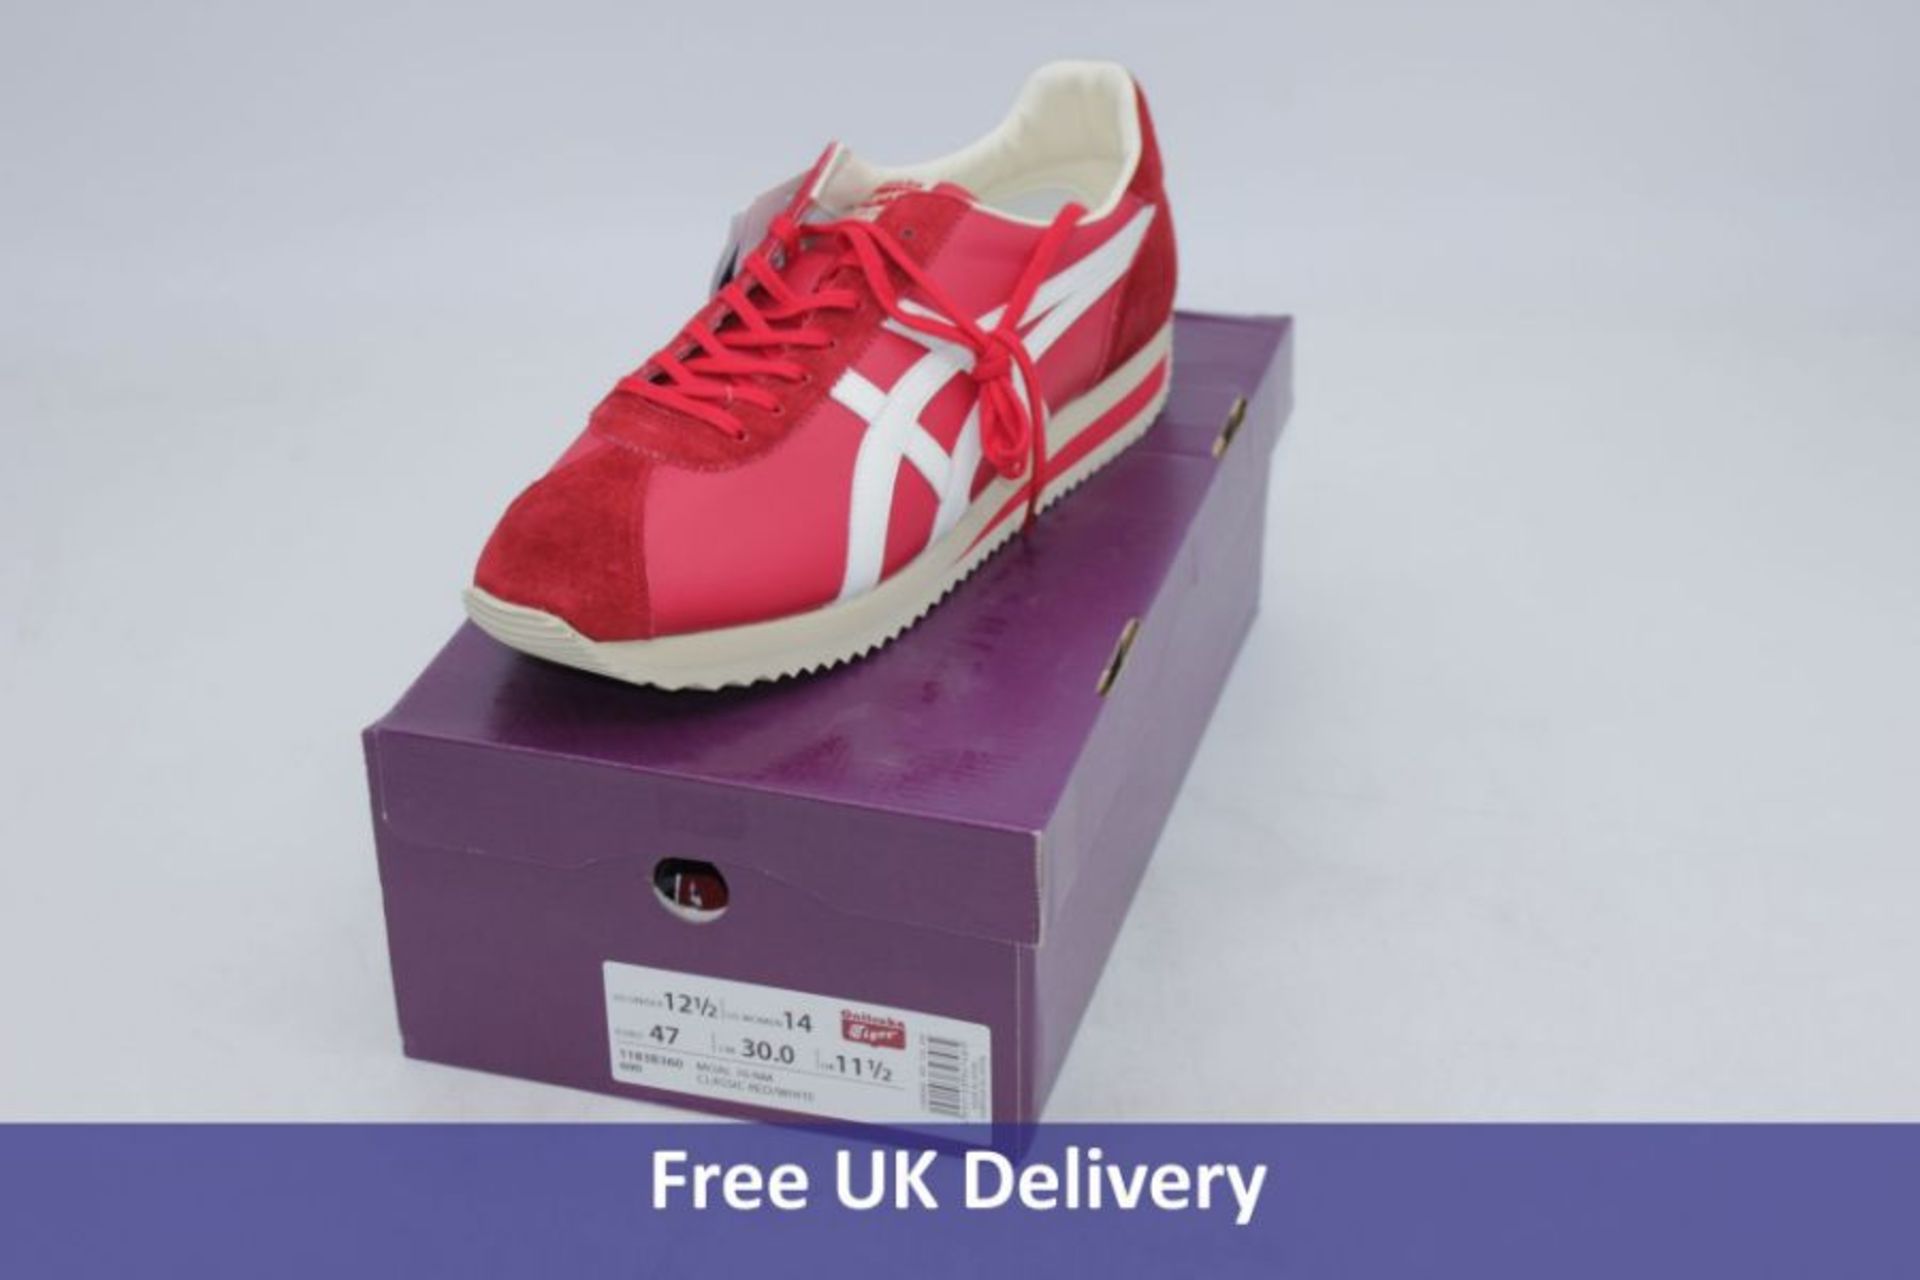 Onitsuka Tiger Moal 76 NM Trainers, Red/White, UK 11.5